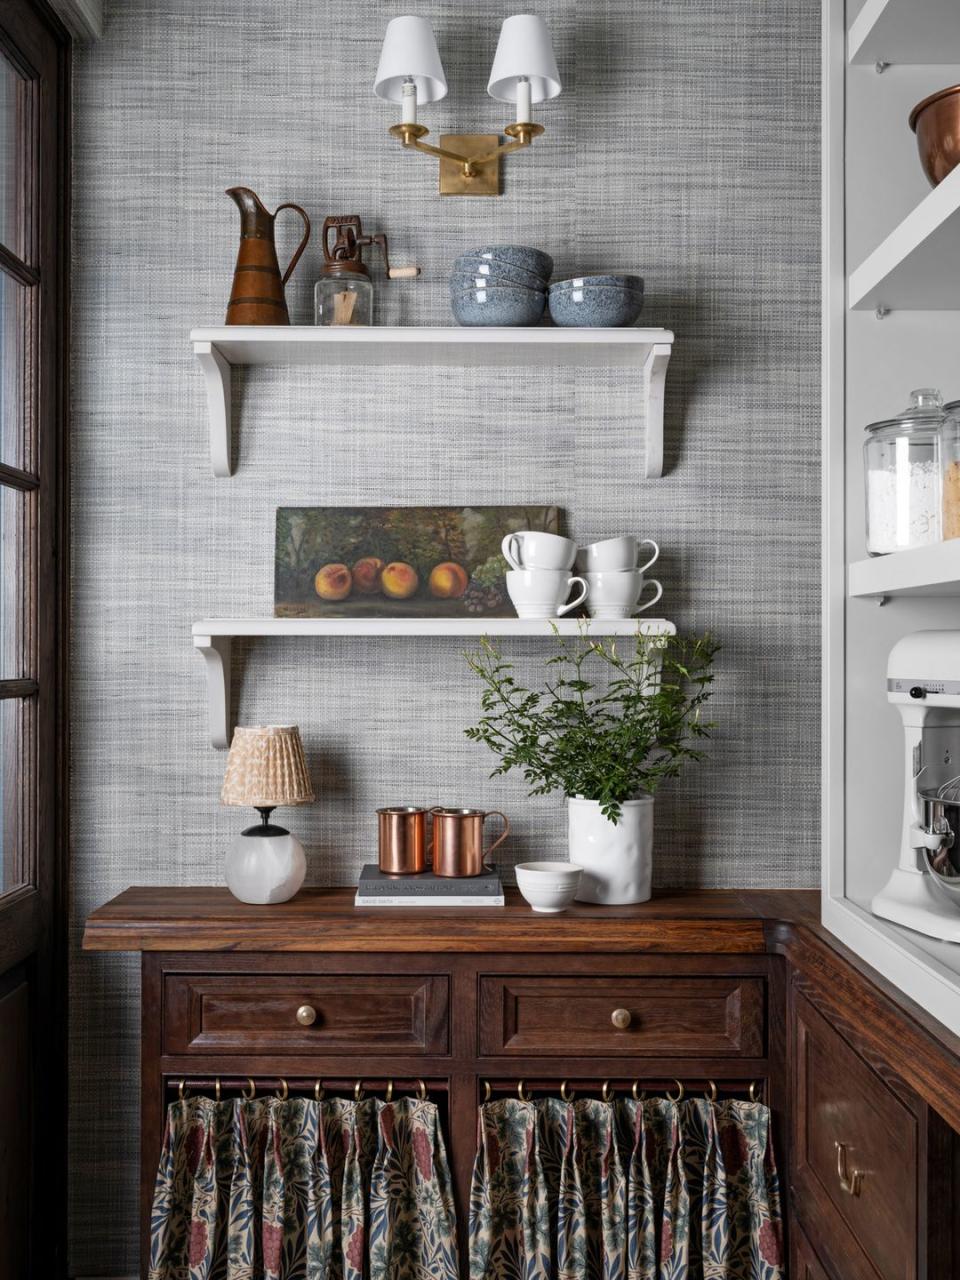 stocked shelves across from the scullery, a walk in pantry keeps small appliances and kitchenware from wayfair within reach fixed lower shelves are paneled with caesarstone, while upper shelves are adjustable